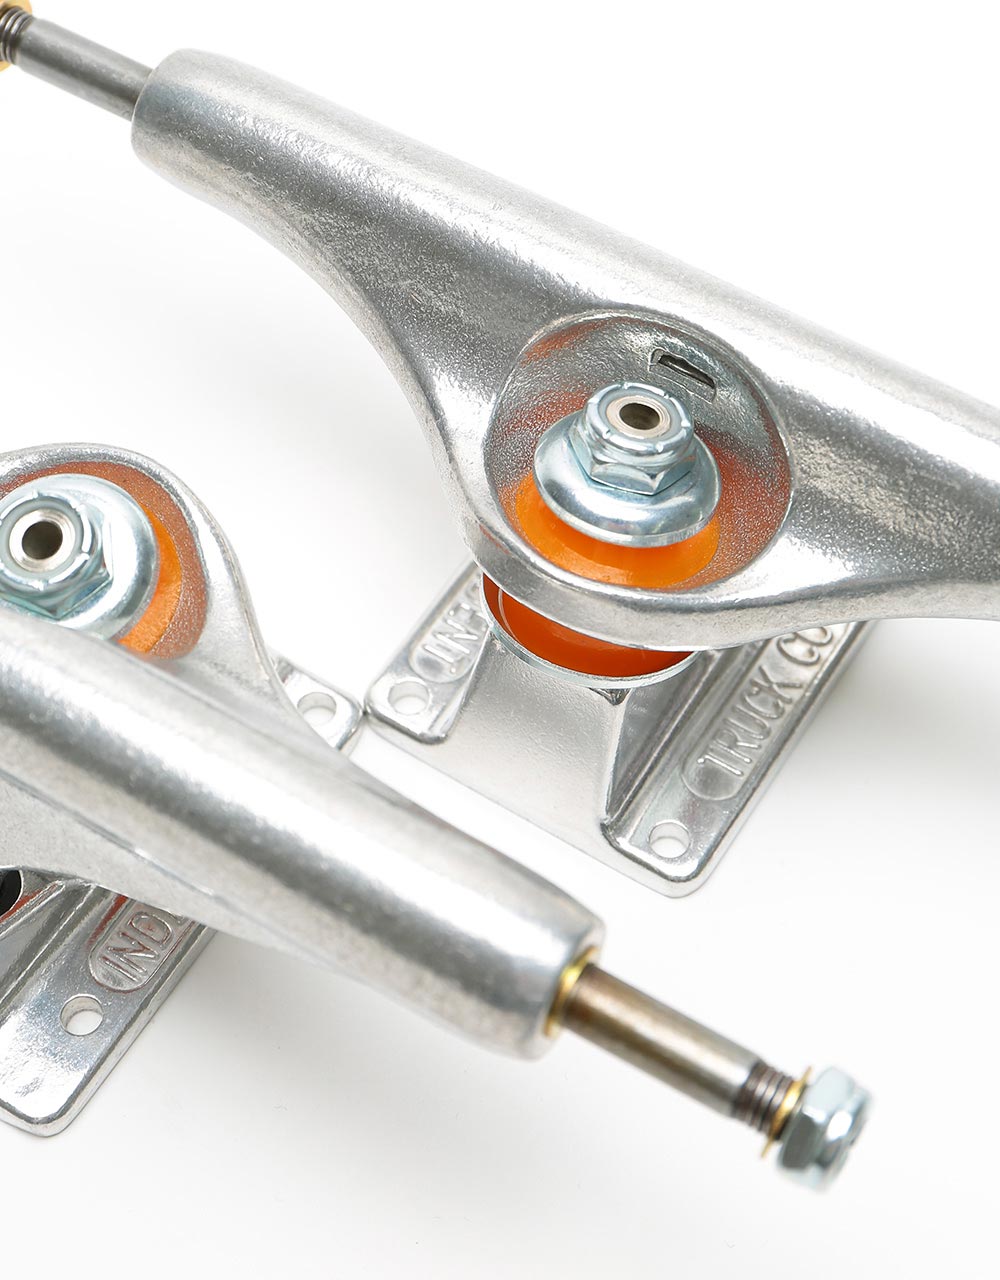 Independent Stage 11 Hollow Forged 169 Standard Skateboard Trucks (Pair)